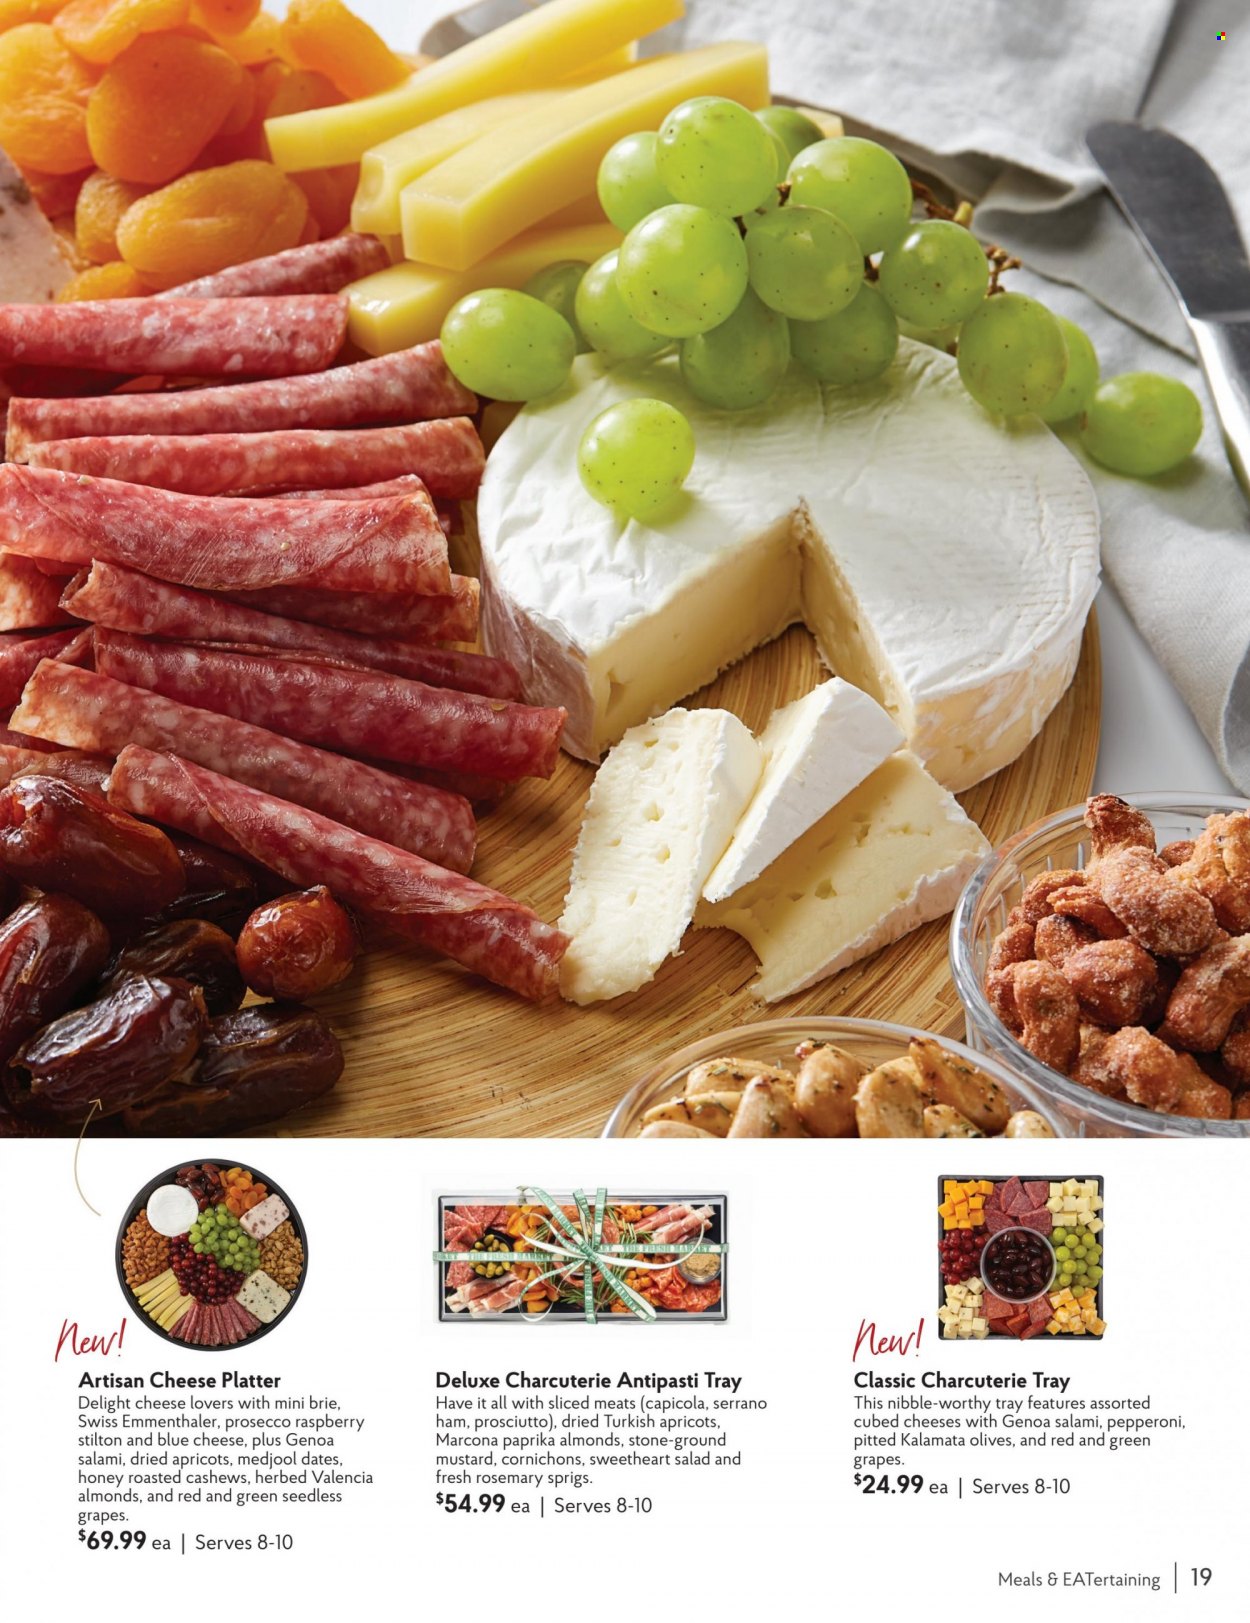 thumbnail - The Fresh Market Flyer - Sales products - grapes, seedless grapes, apricots, salami, ham, prosciutto, pepperoni, blue cheese, emmenthaler cheese, Stilton, cheese, brie, olives, rosemary, mustard, honey, almonds, cashews, dried fruit, dried dates, prosecco. Page 19.